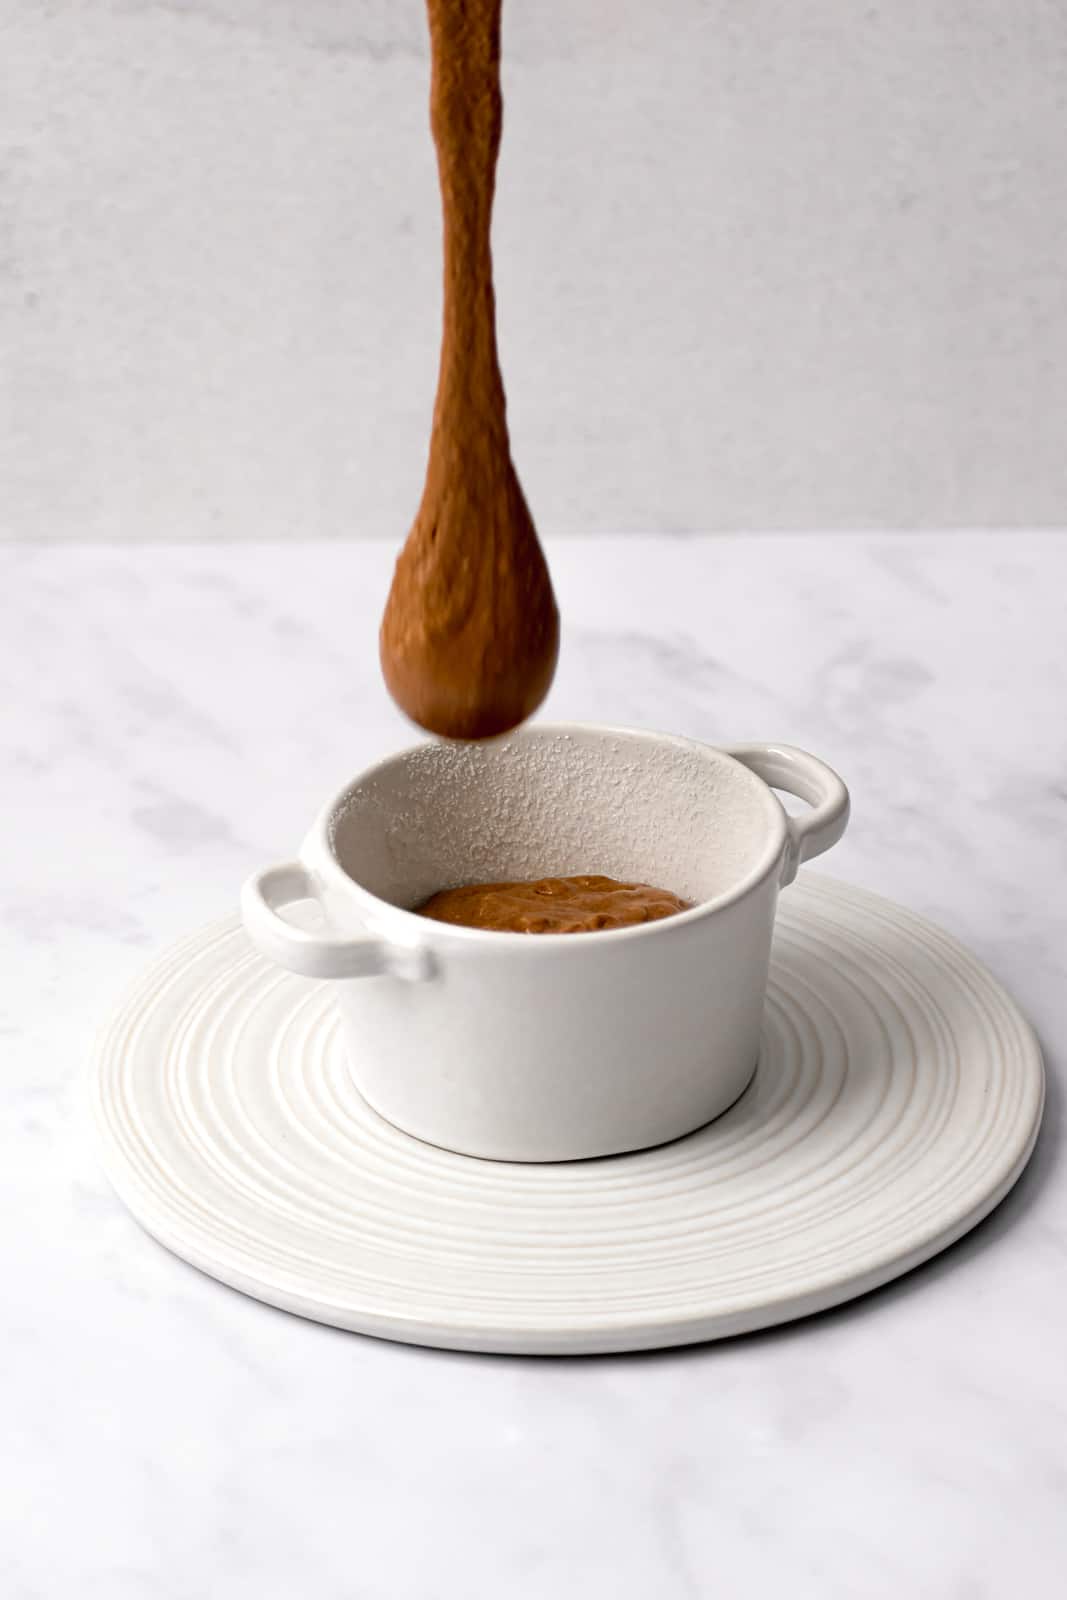 soufflé batter being poured into a white ramekin on top of a white trivet